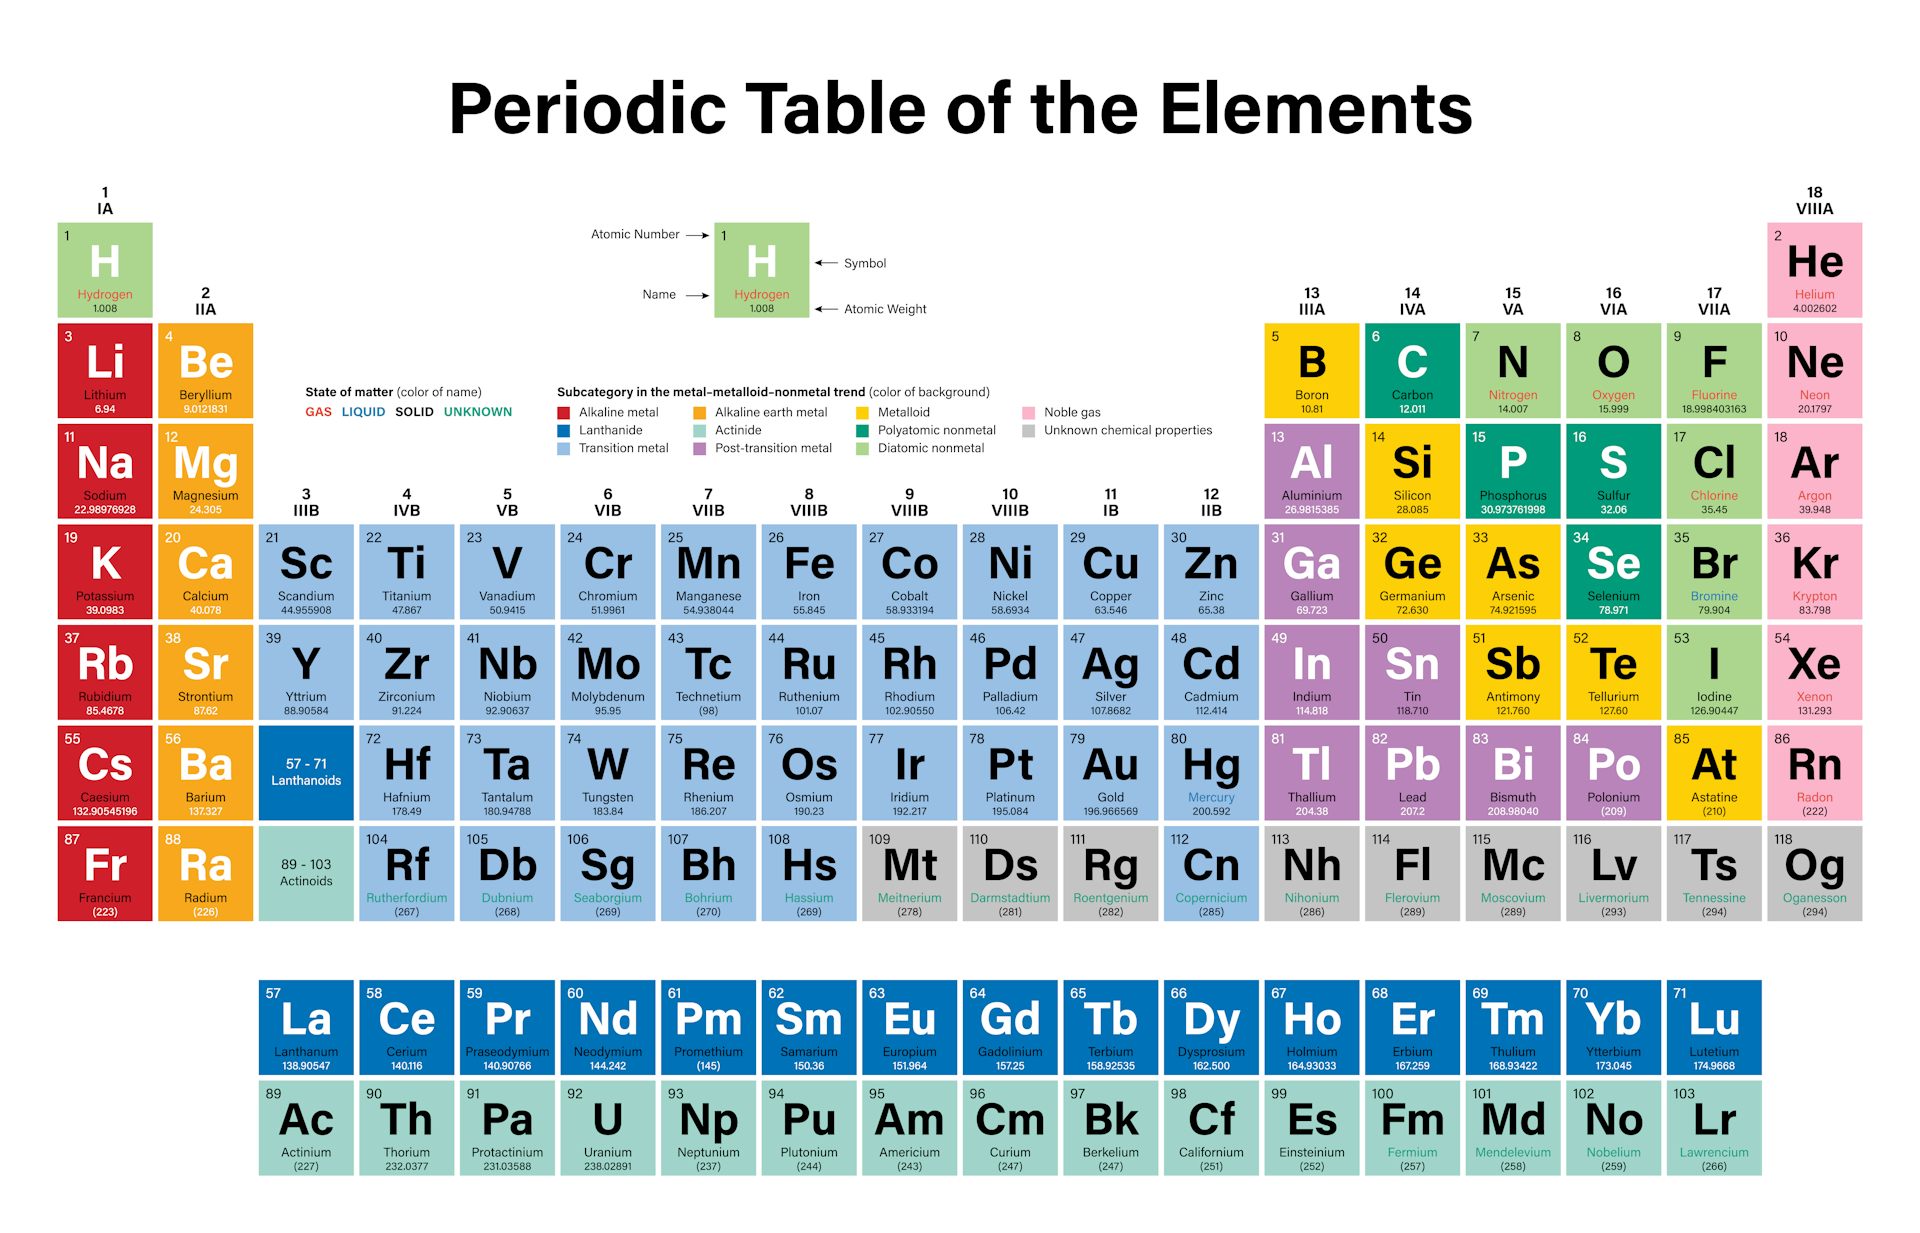 most reactive on periodic table